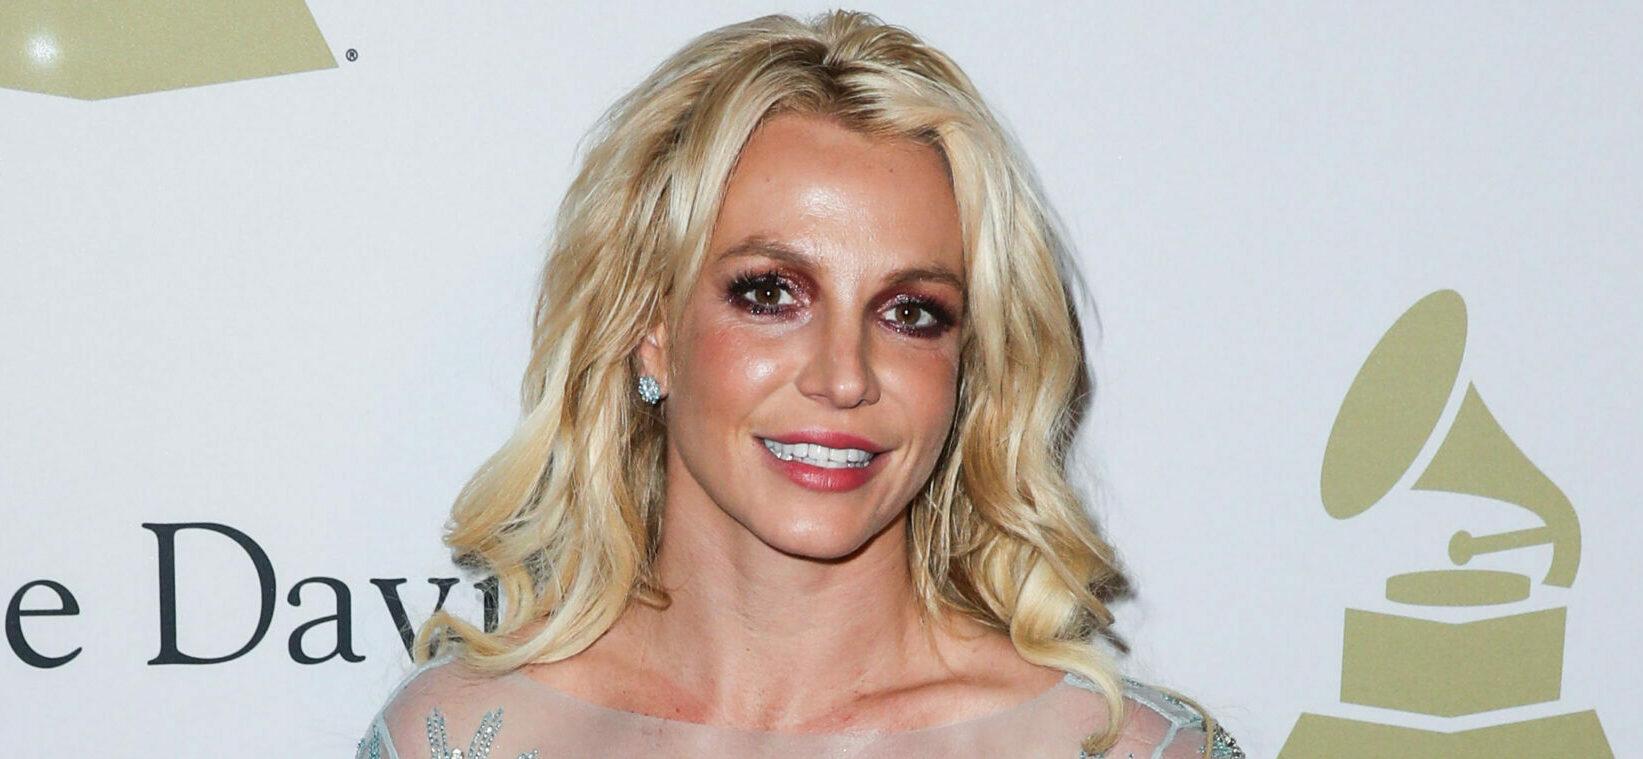 Britney Spears Fans Look At Her Teeth For Signs Of AI In New Instagram Video